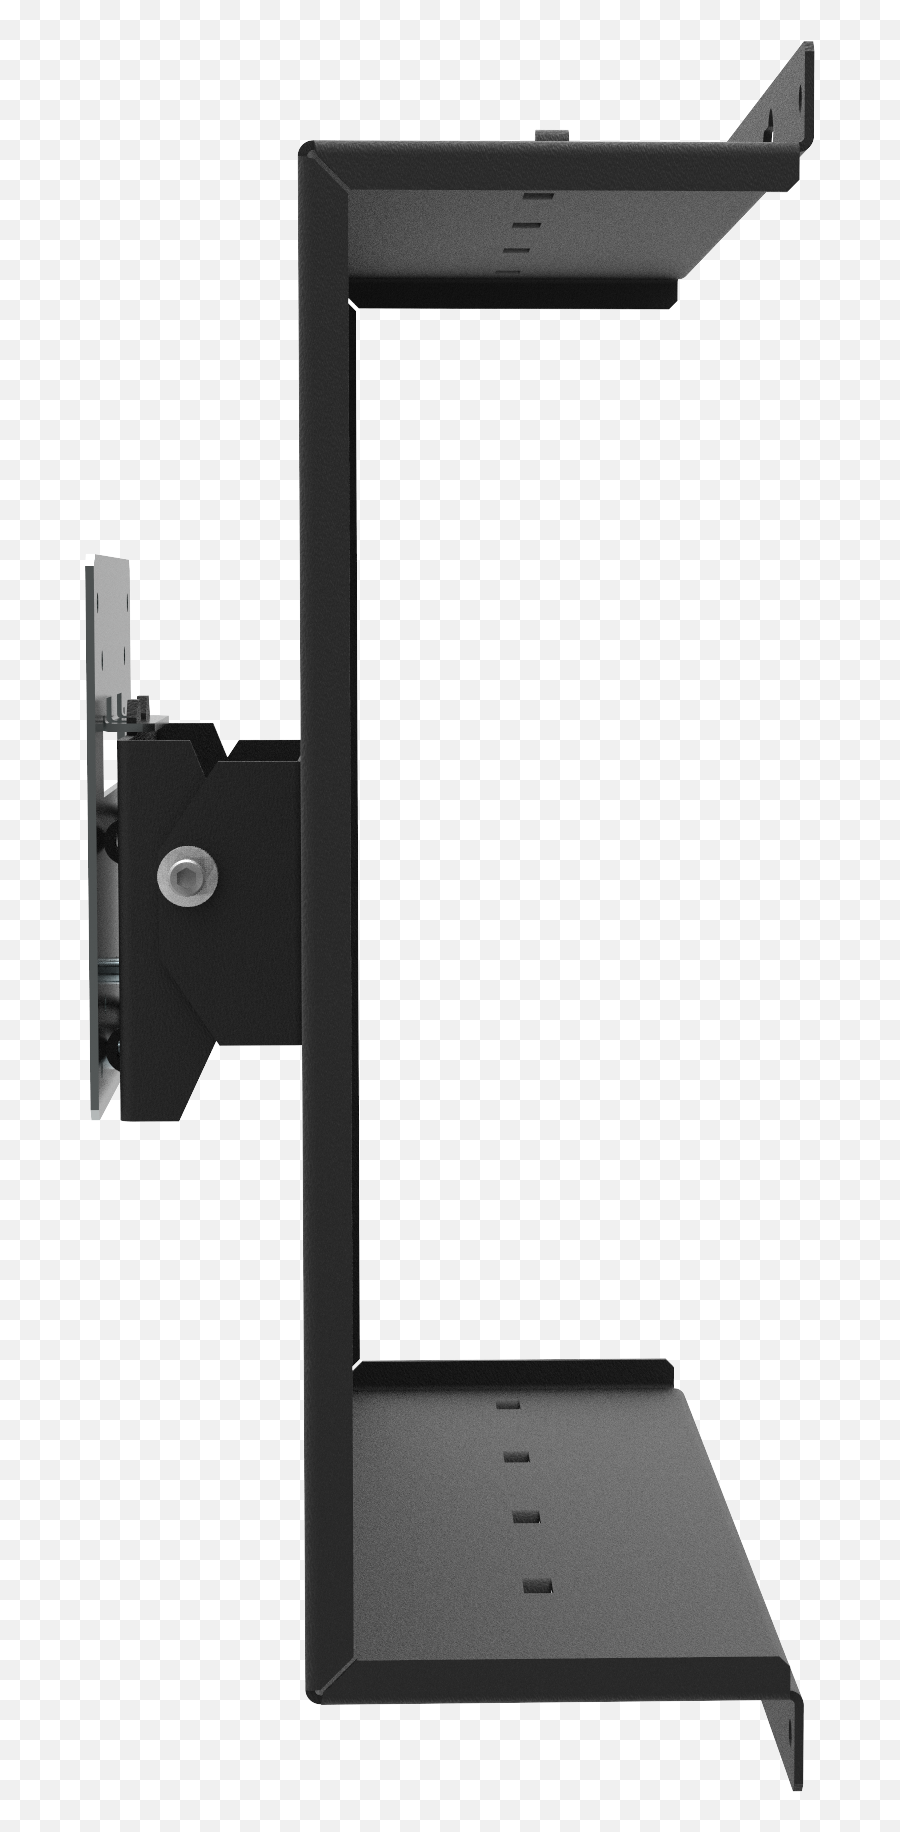 Racksolutions Dell Inspiron Sff - Bracket For Lcd Display Cpu Wallmountable For Dell Inspiron 3250 Sff 3252 Sff Optiplex 3040 Sff Vertical Emoji,Canned Beans Unturned Emoticon